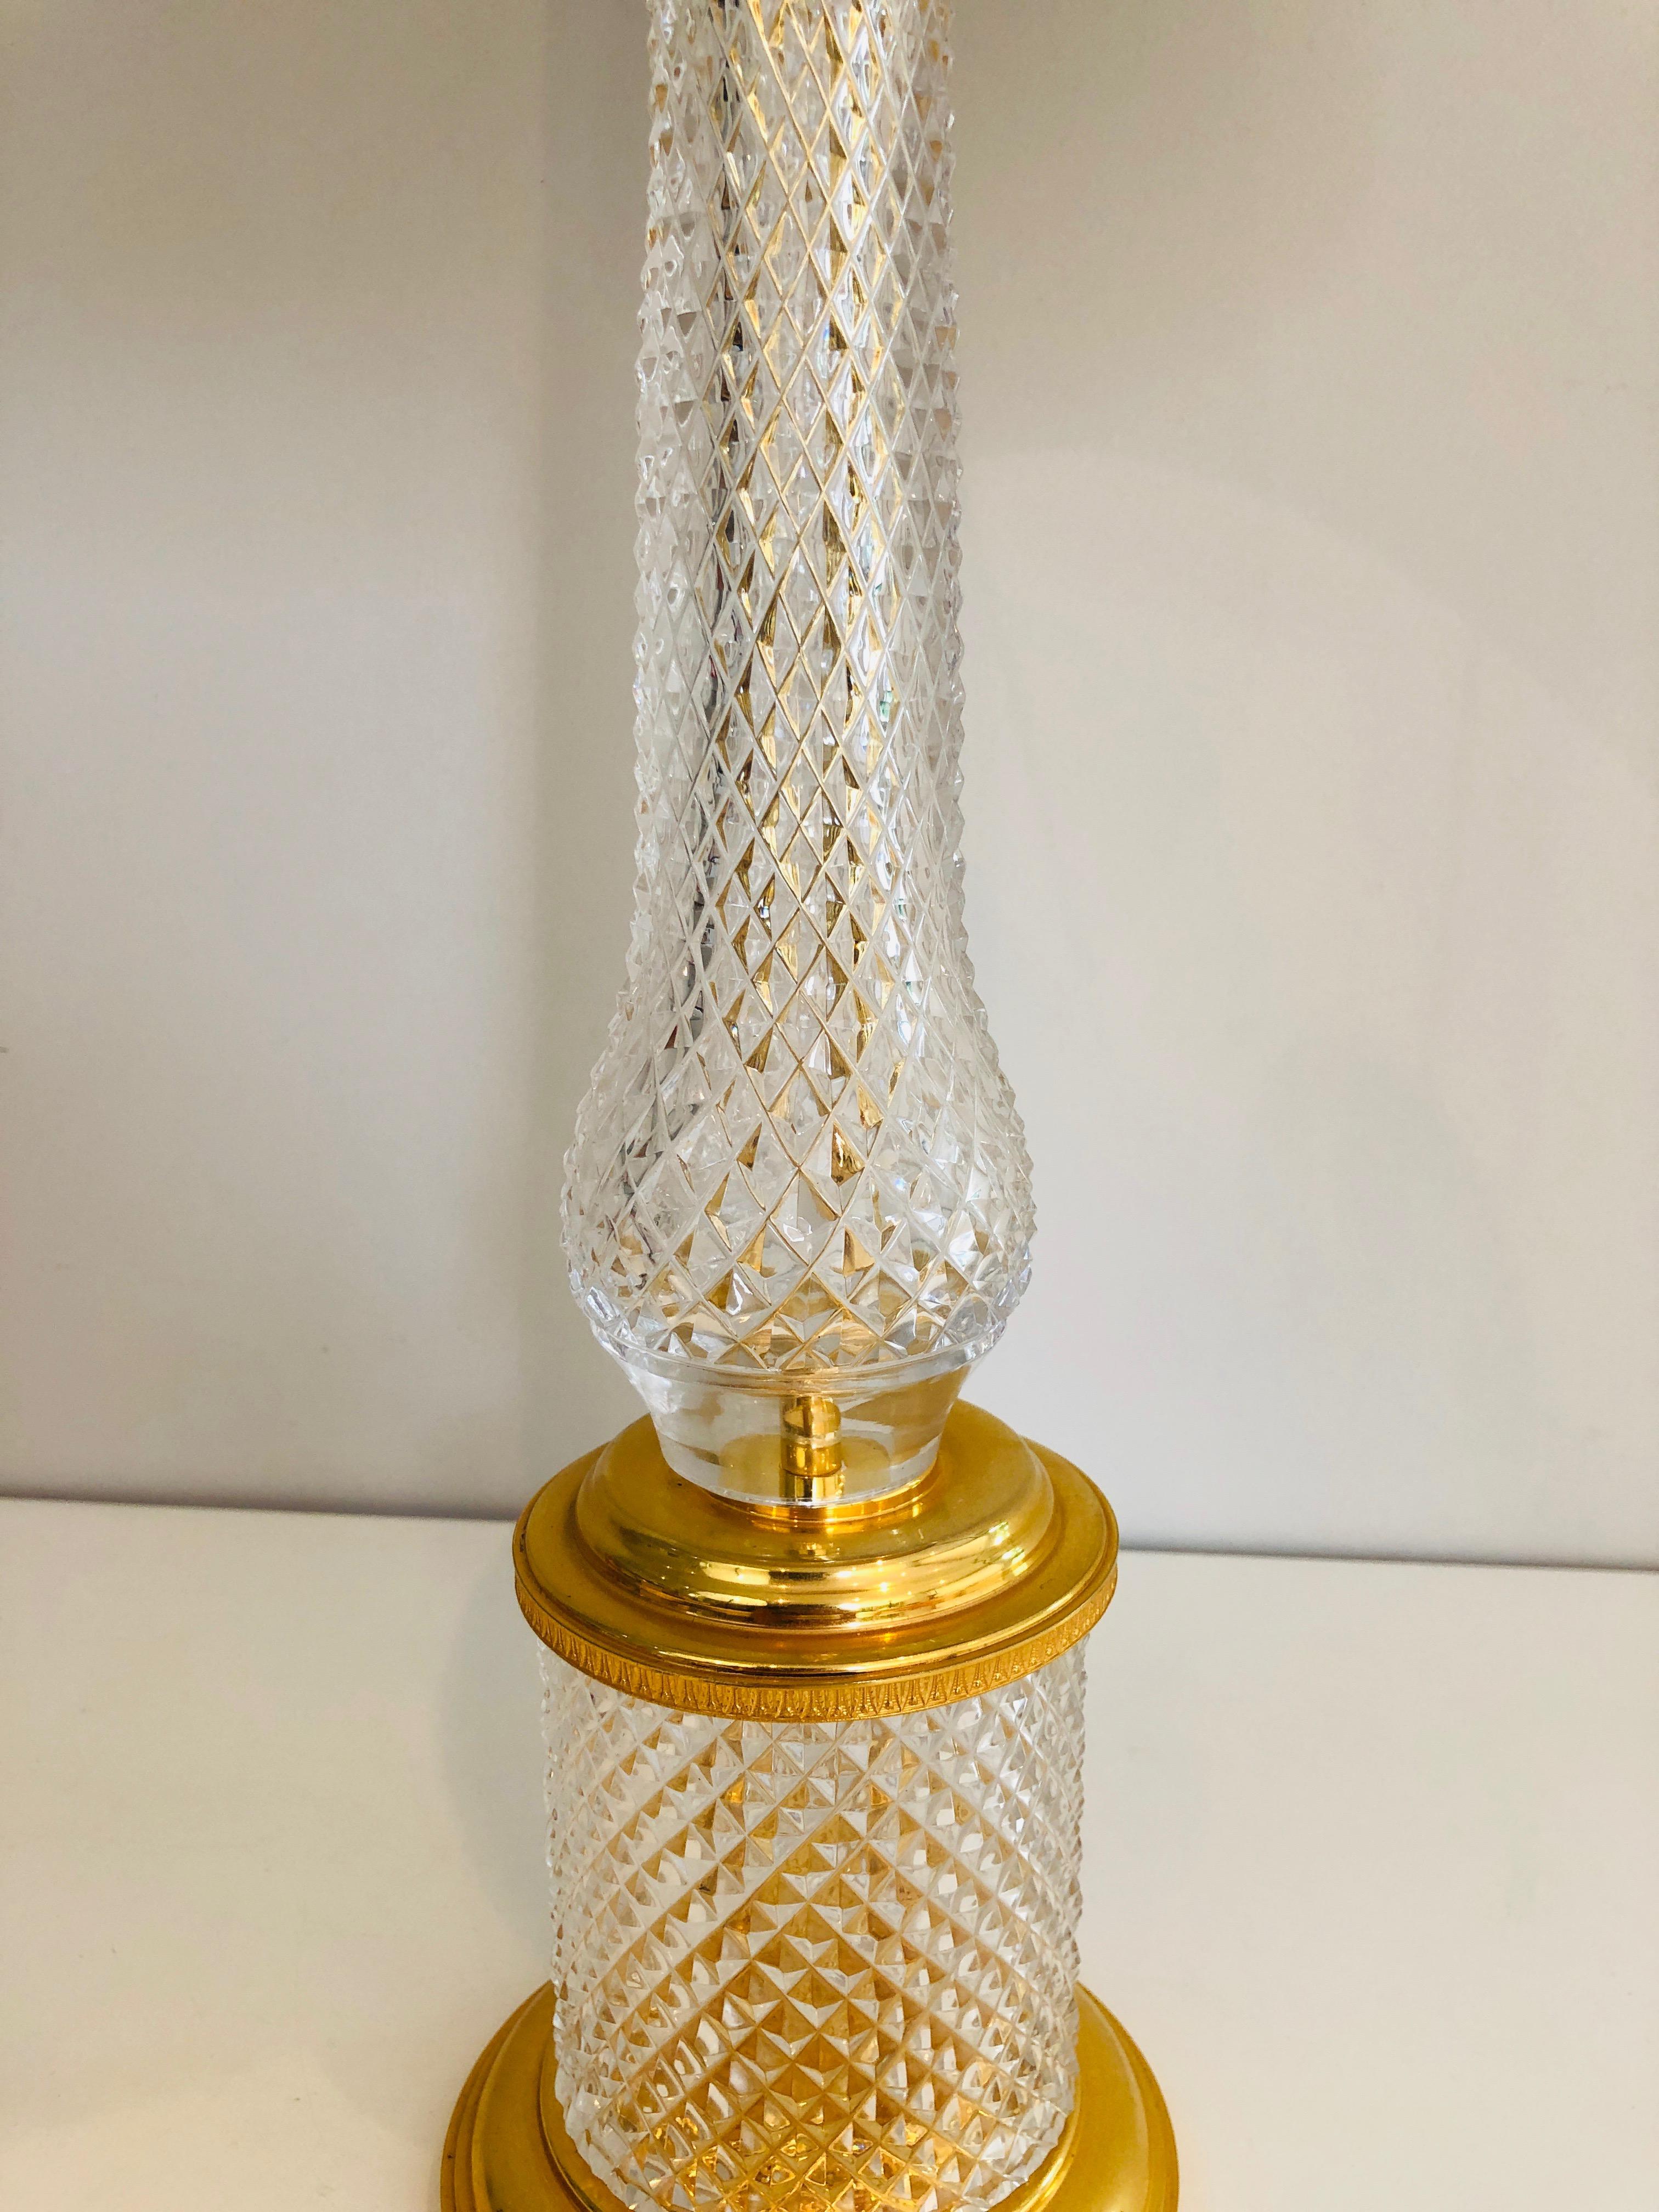 Late 20th Century Cut Crystal and Gilt Metal Table Lamp, French, Circa 1970